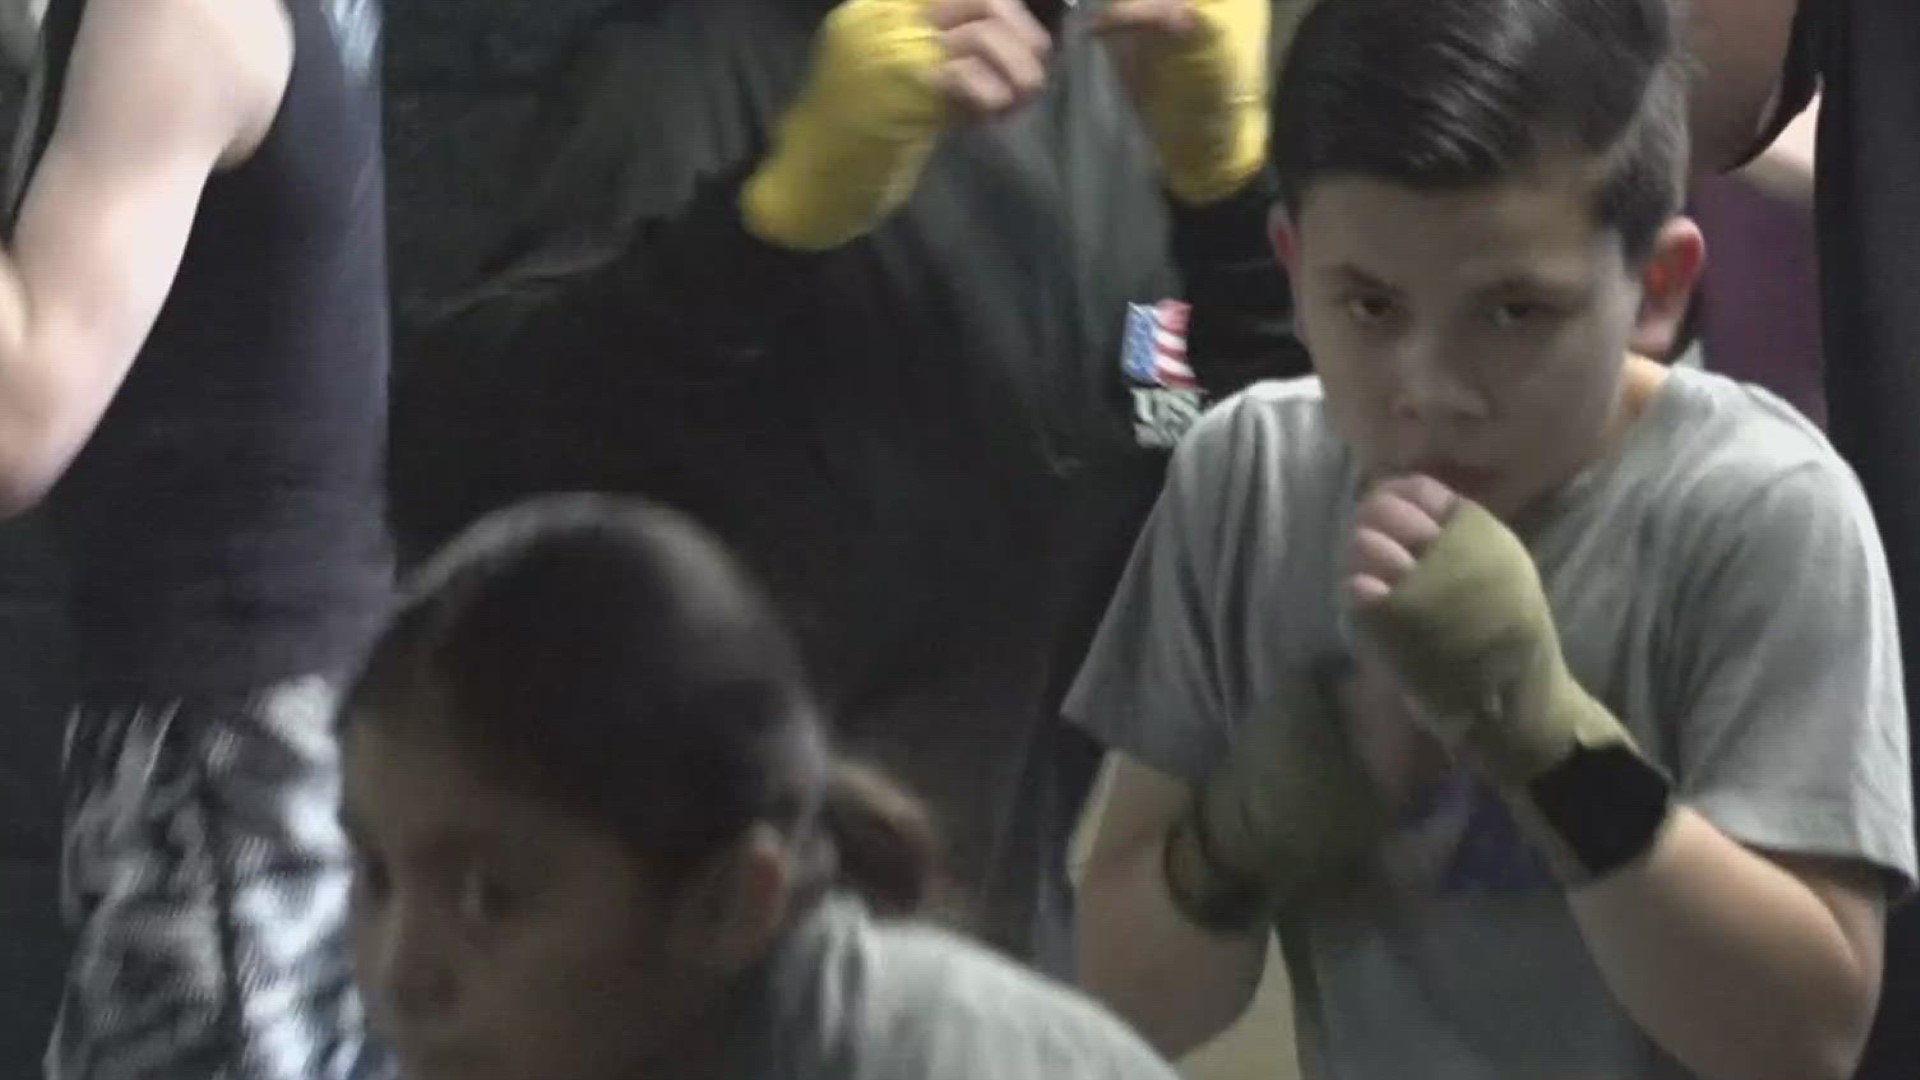 Jordan Pinney started non-profit boxing program, Mustang Boxing Outreach Program, to keep kids ages 8-16 off the streets and in a safe environment.